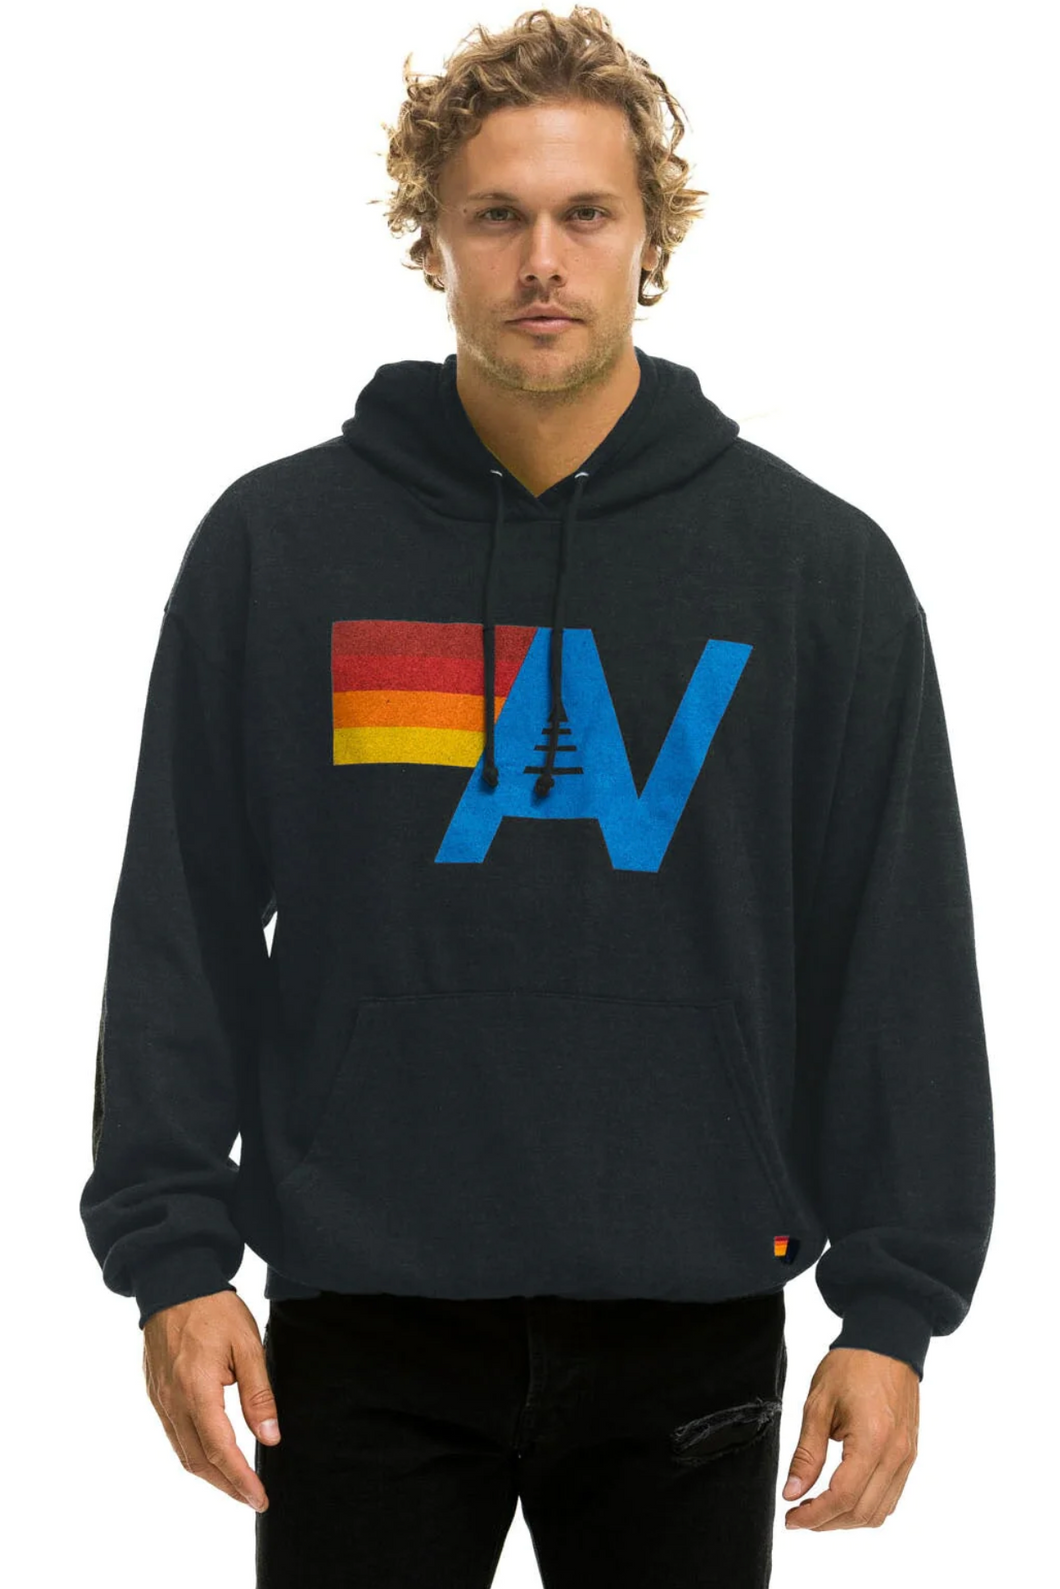 AVIATOR NATION UNISEX LOGO PULLOVER RELAXED HOODIE - CHARCOAL